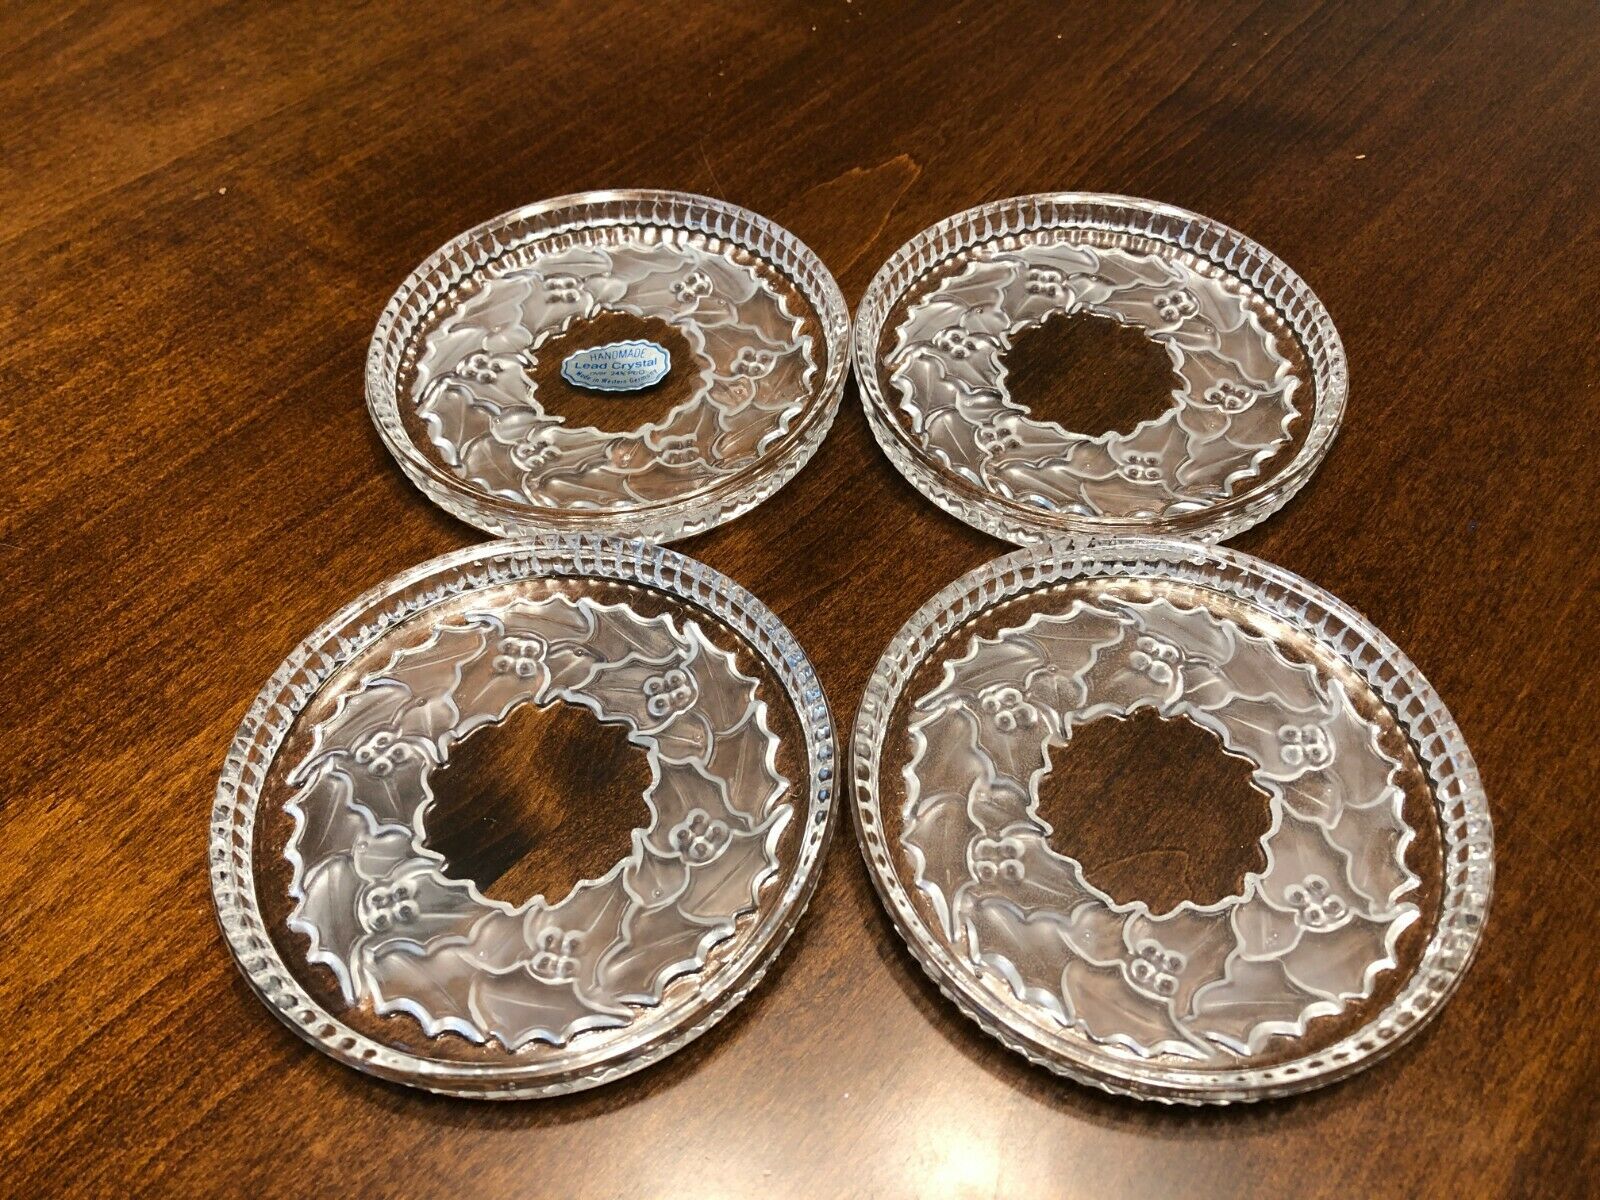 Set Of 4 Lead Crystal Christmas Wreath Coasters New In Box, Handmade In Germany